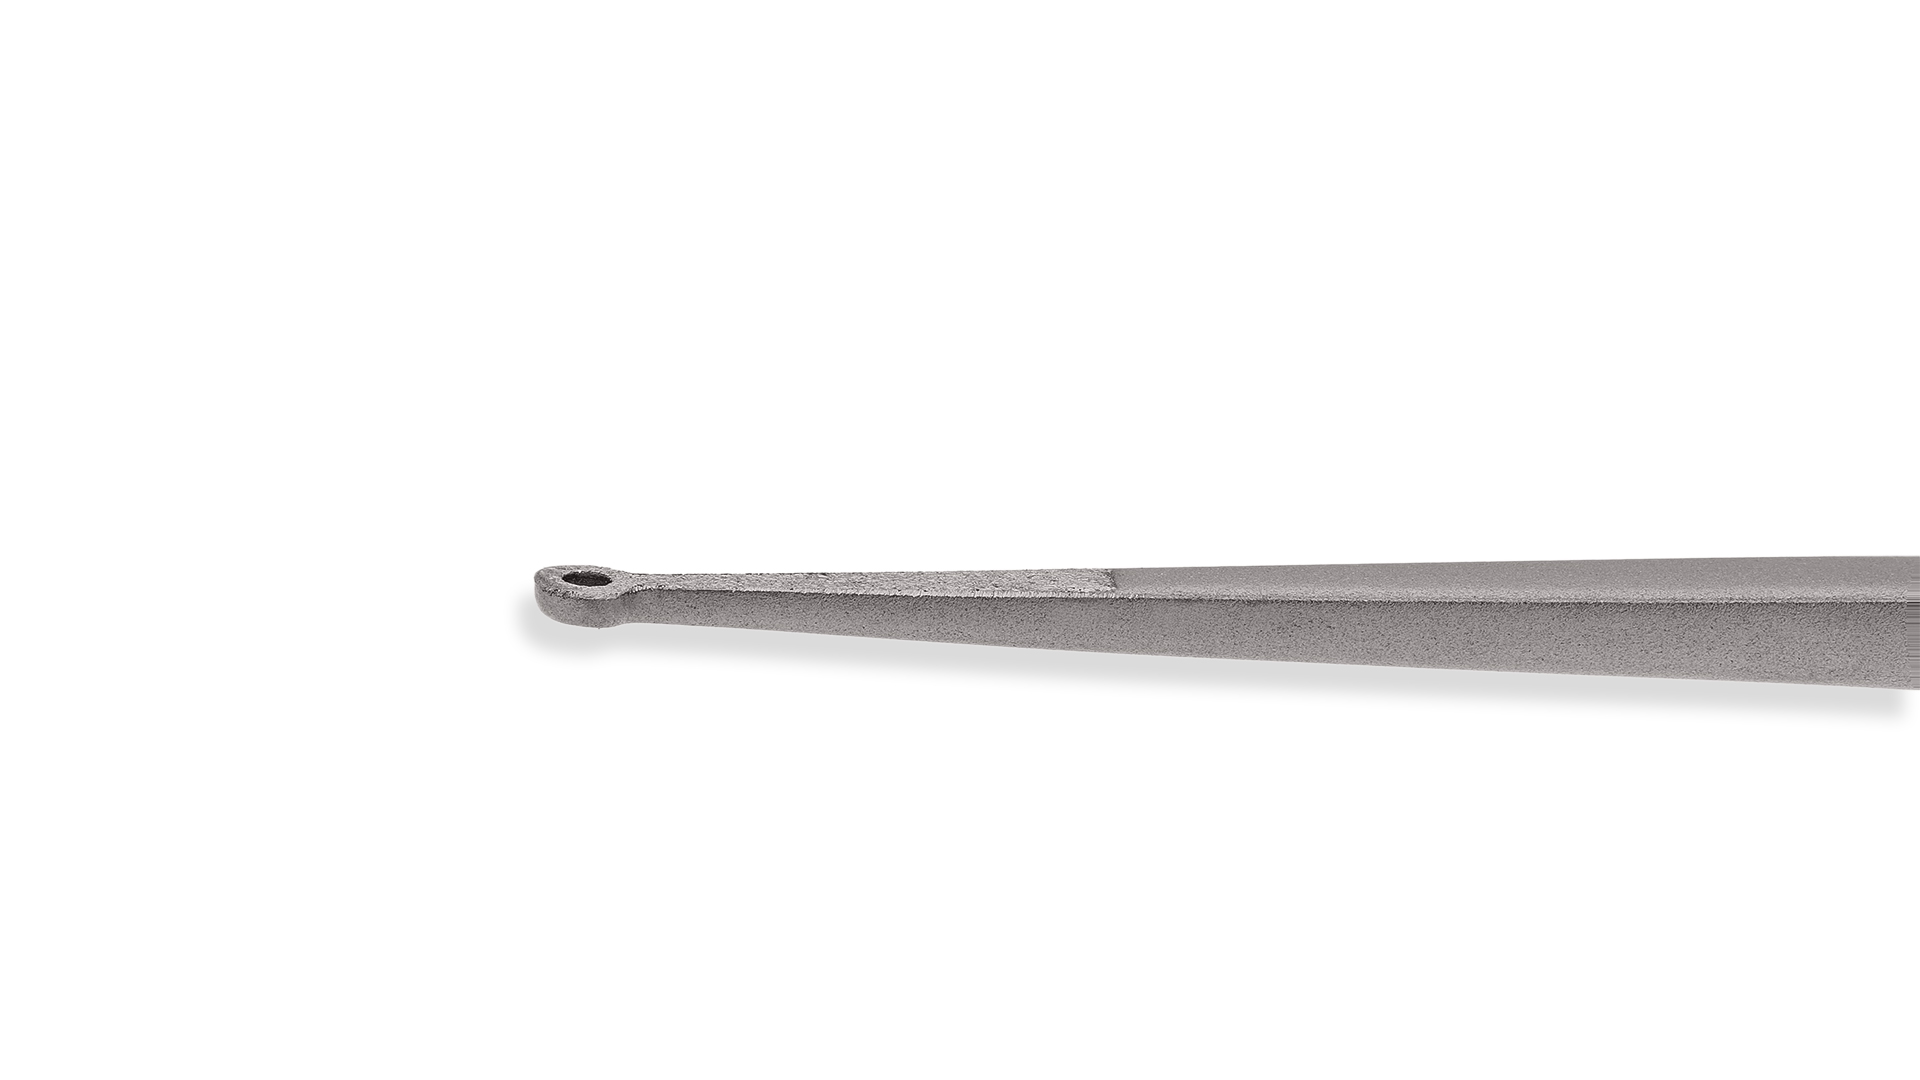 Ring tip Forceps - Straight 1mm TC coated rings